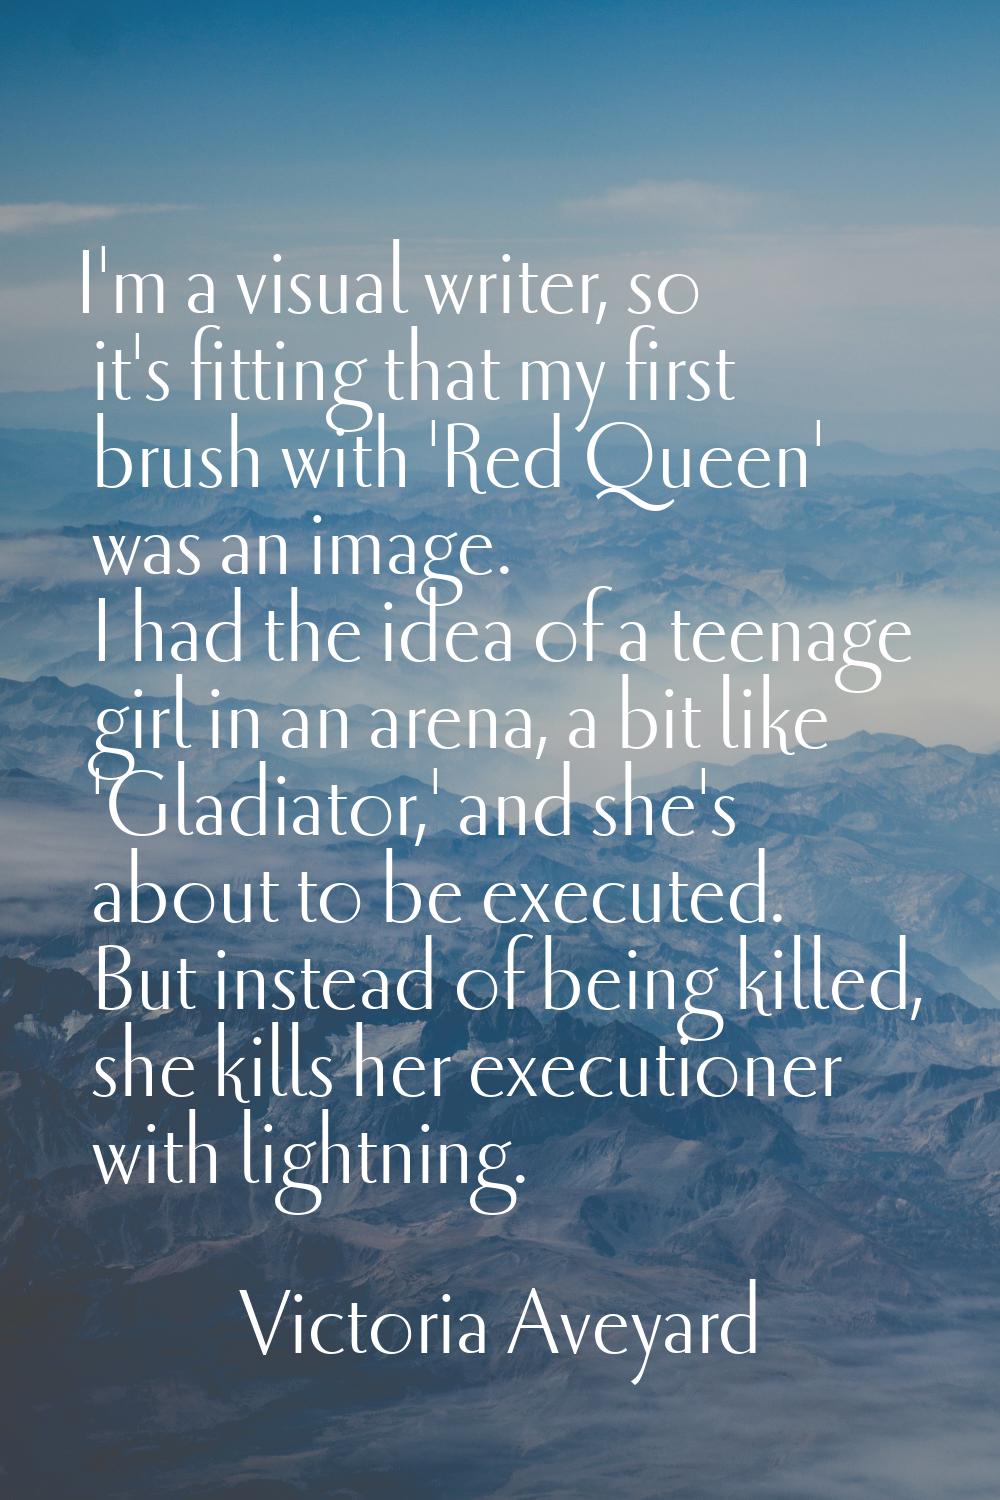 I'm a visual writer, so it's fitting that my first brush with 'Red Queen' was an image. I had the i